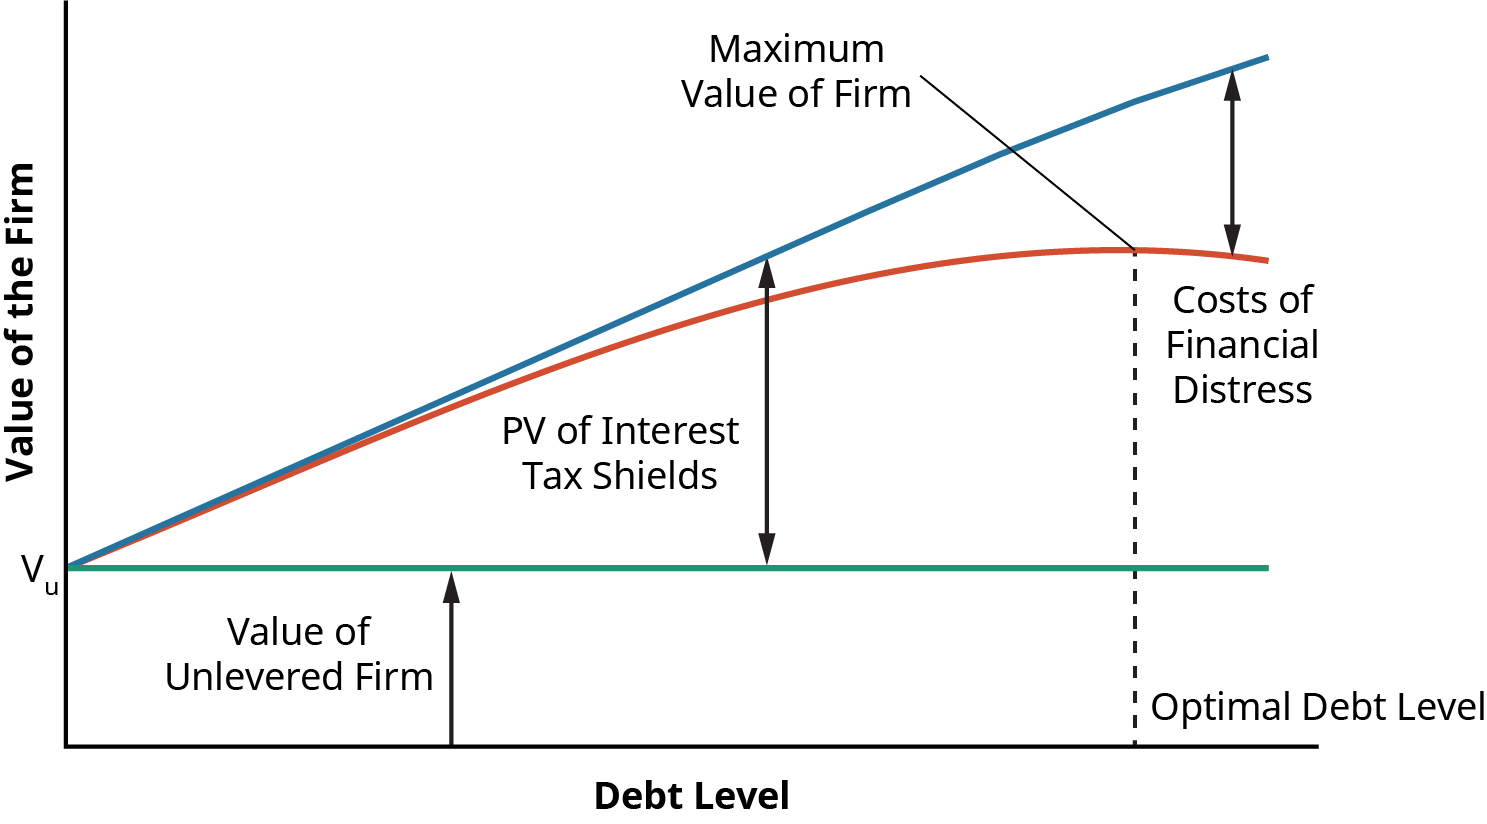 A line graph shows the Maximum Value of a Levered Firm. It shows how at first as the firm adds debt, the PV of interest tax shields rises at a similar rate to the debt. As debt increases, the lines diverge. The maximum value of the firm occurs at the optimal debt level. After this point, the magnitude of the costs of financial distress increase as the debt level of the company rises.